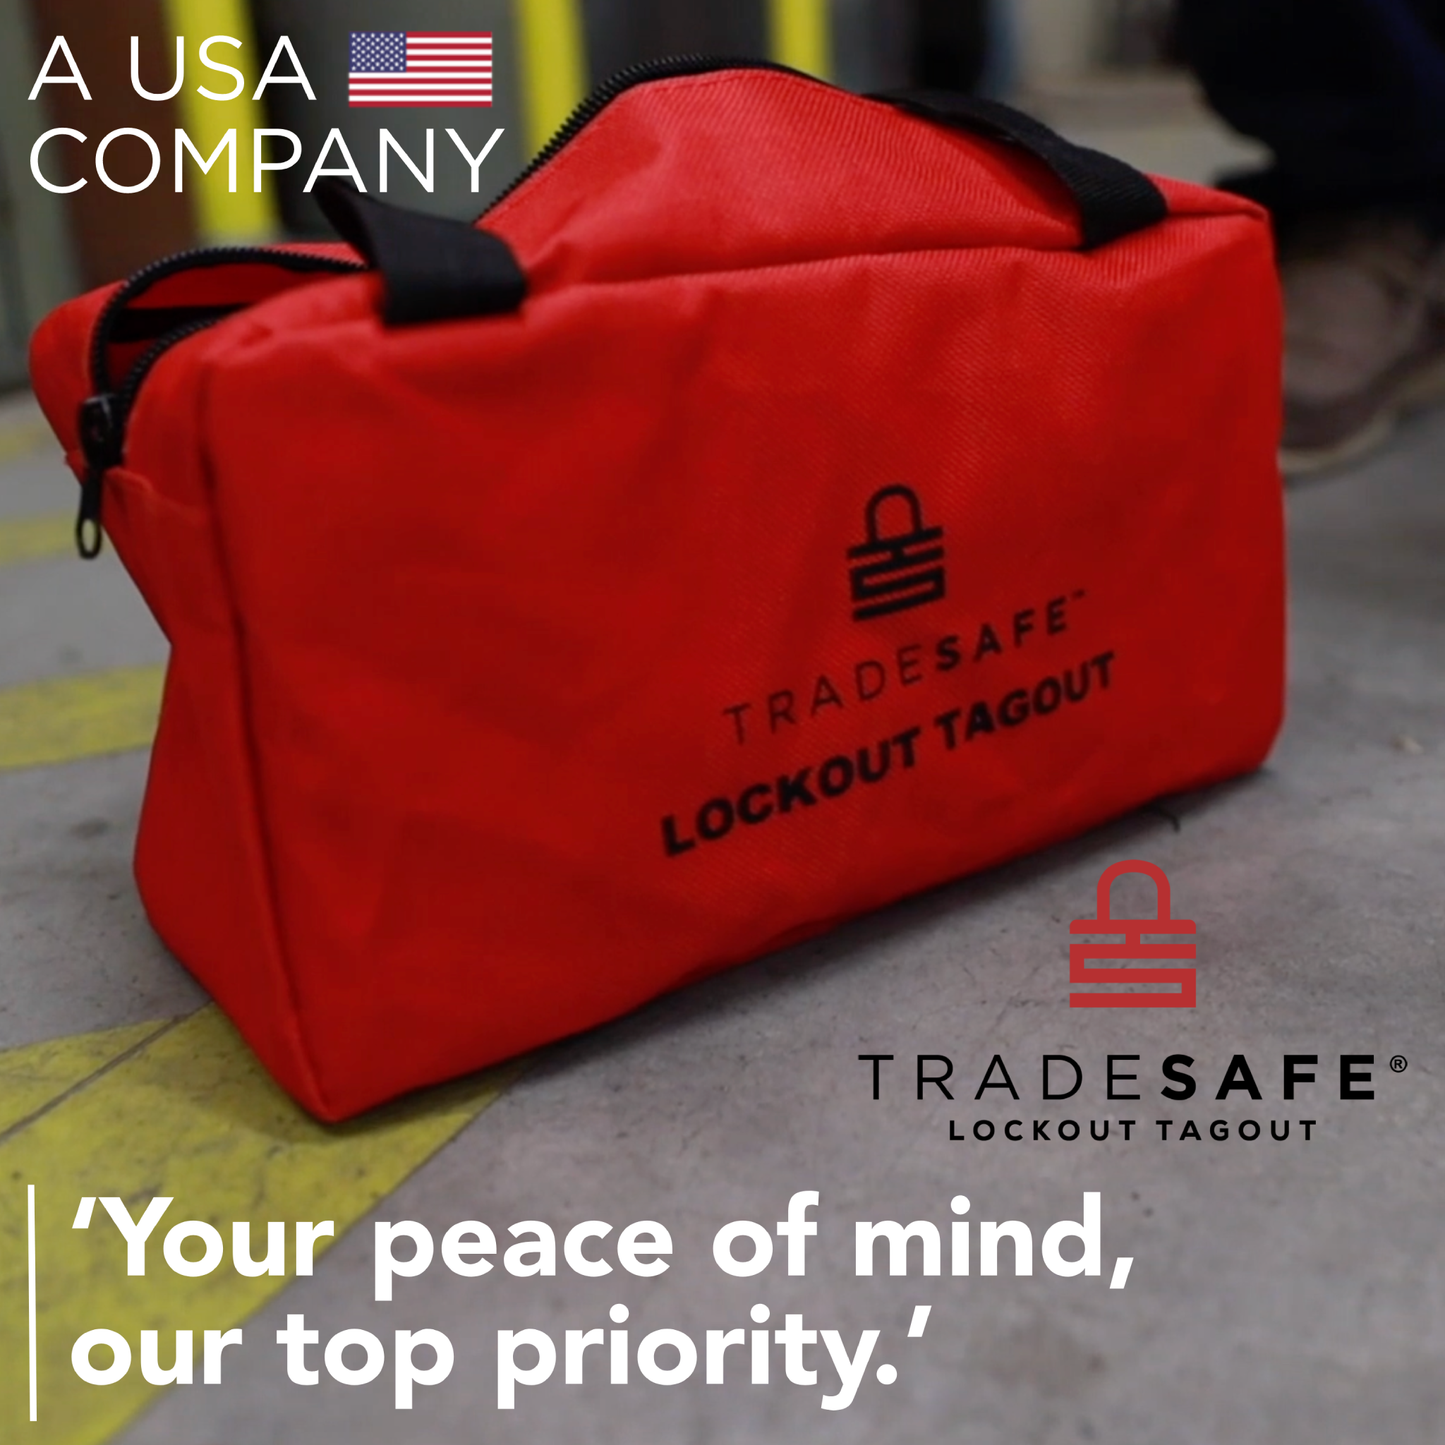 tradesafe lockout tagout brand image; your peace of mind, our top priority